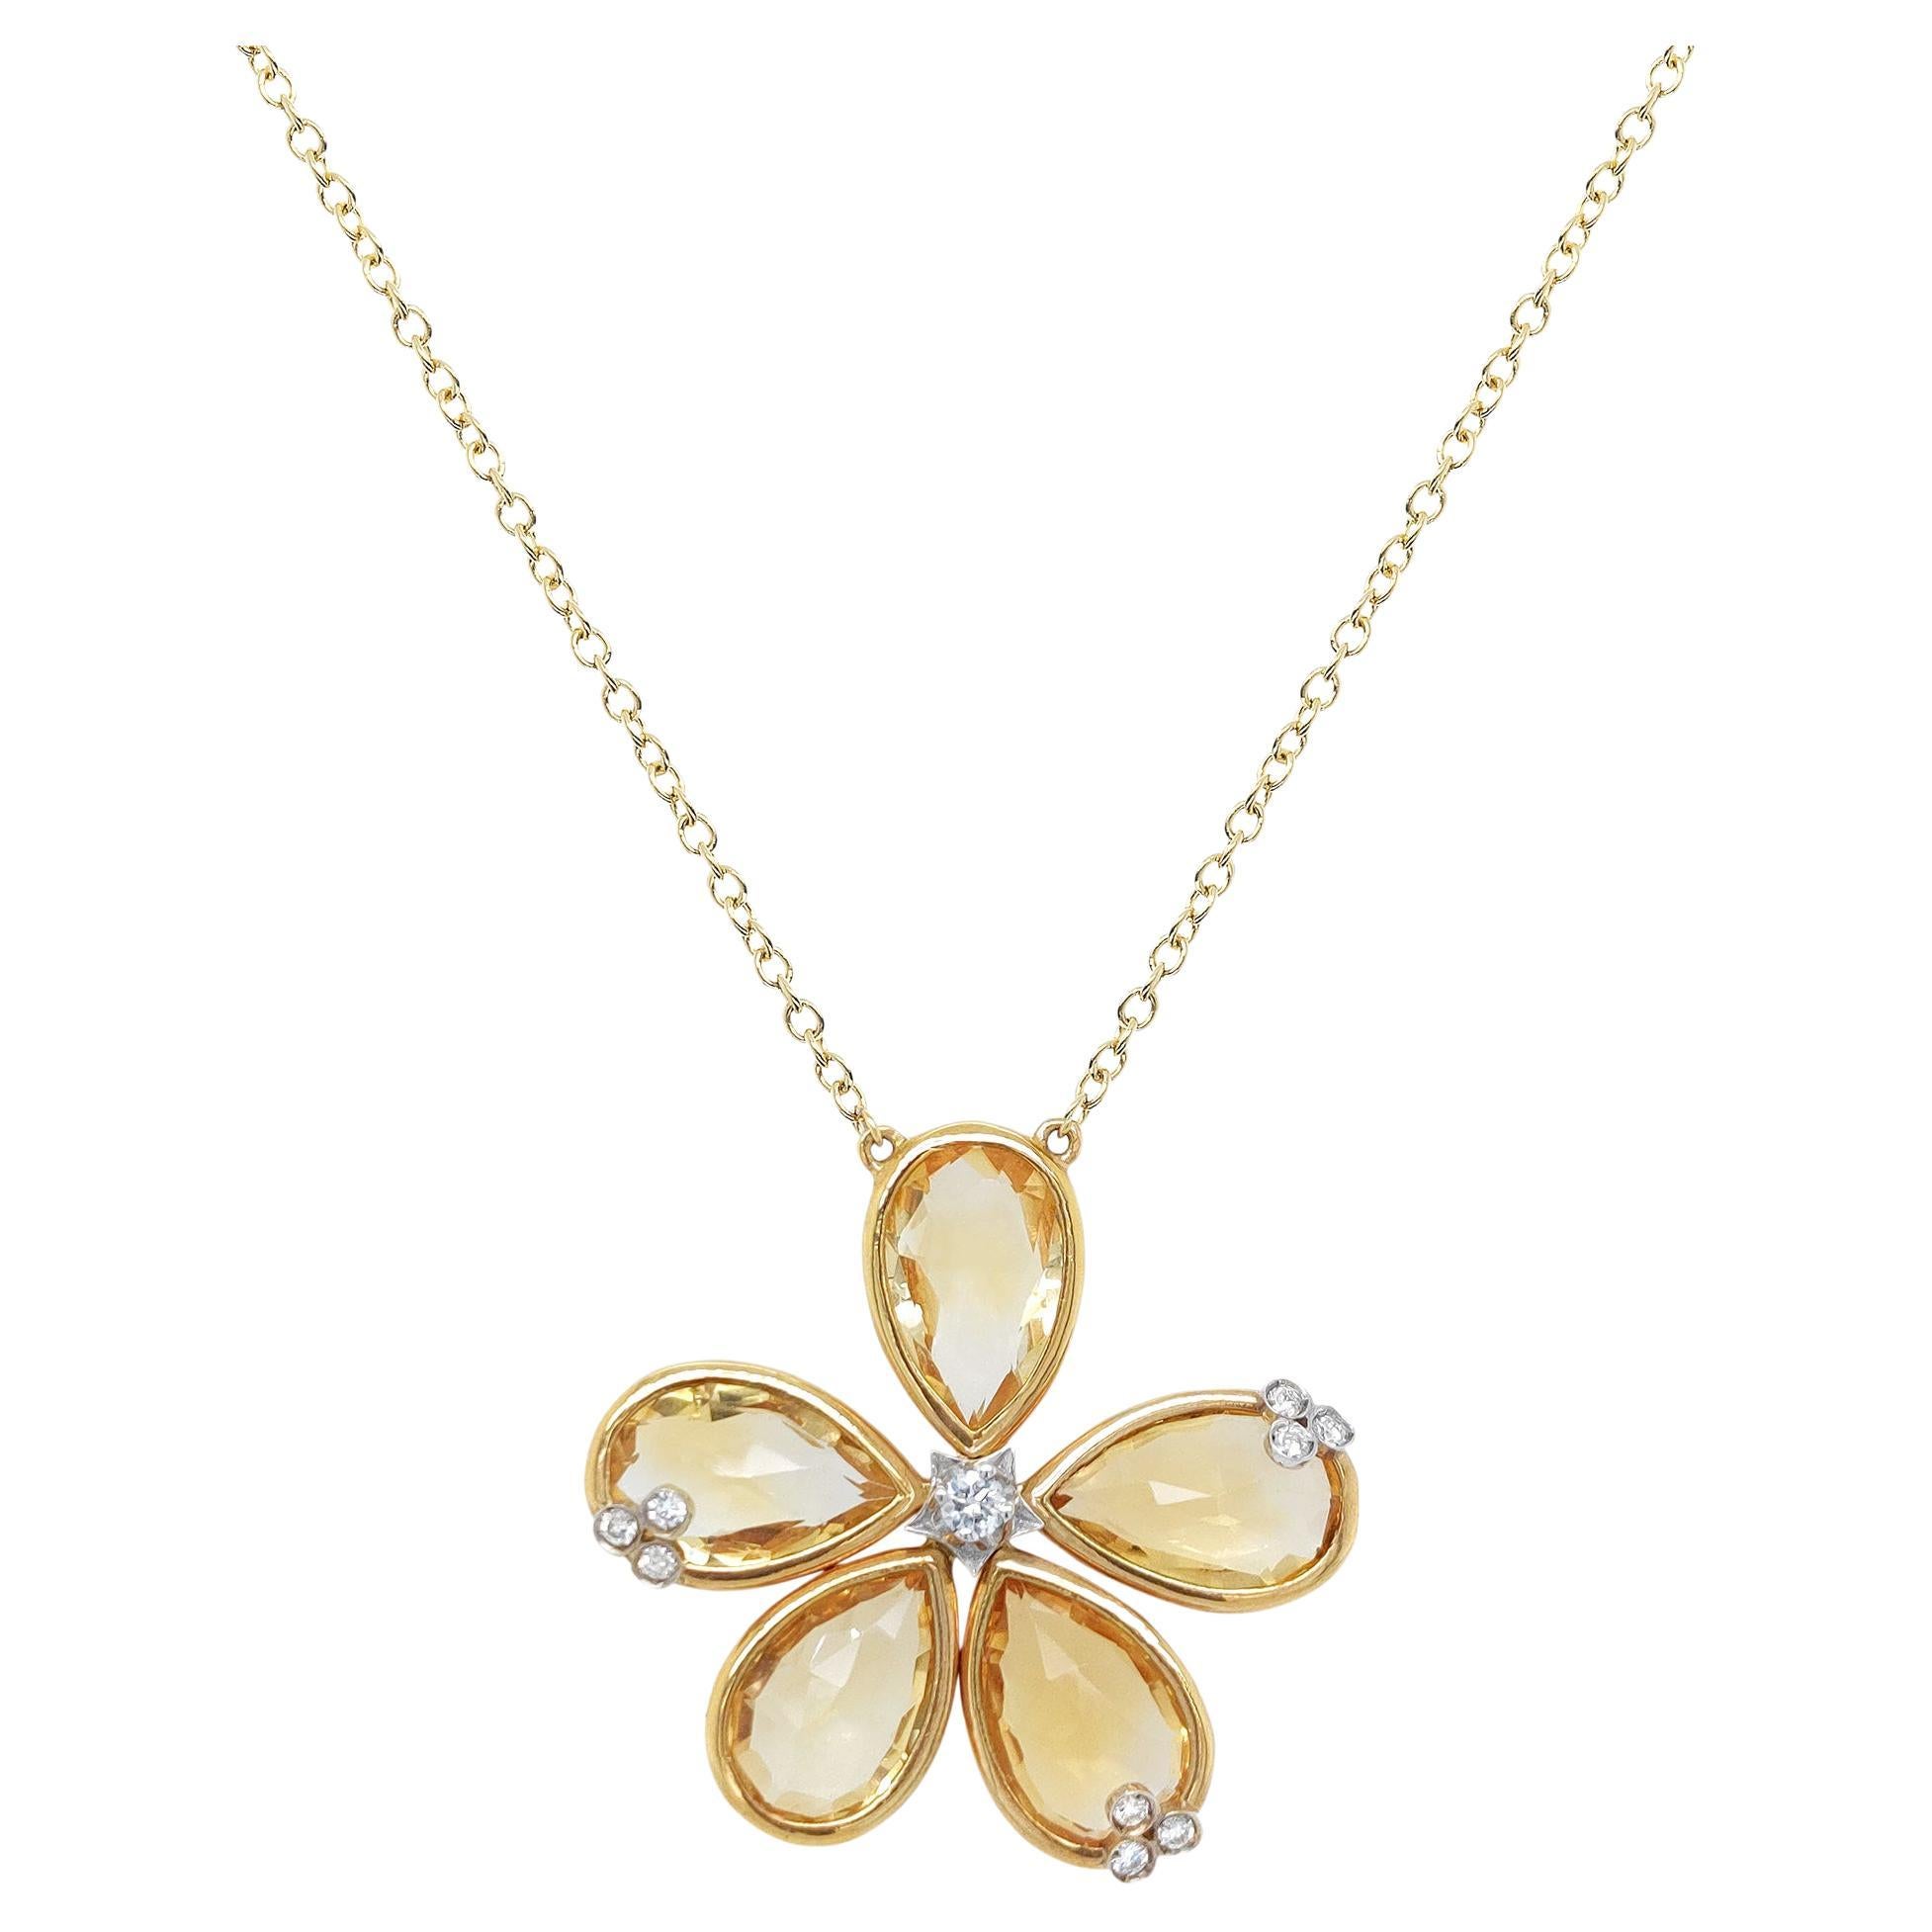 18kt Yellow Gold necklace with flower pendant in Citrine quartz and diamonds